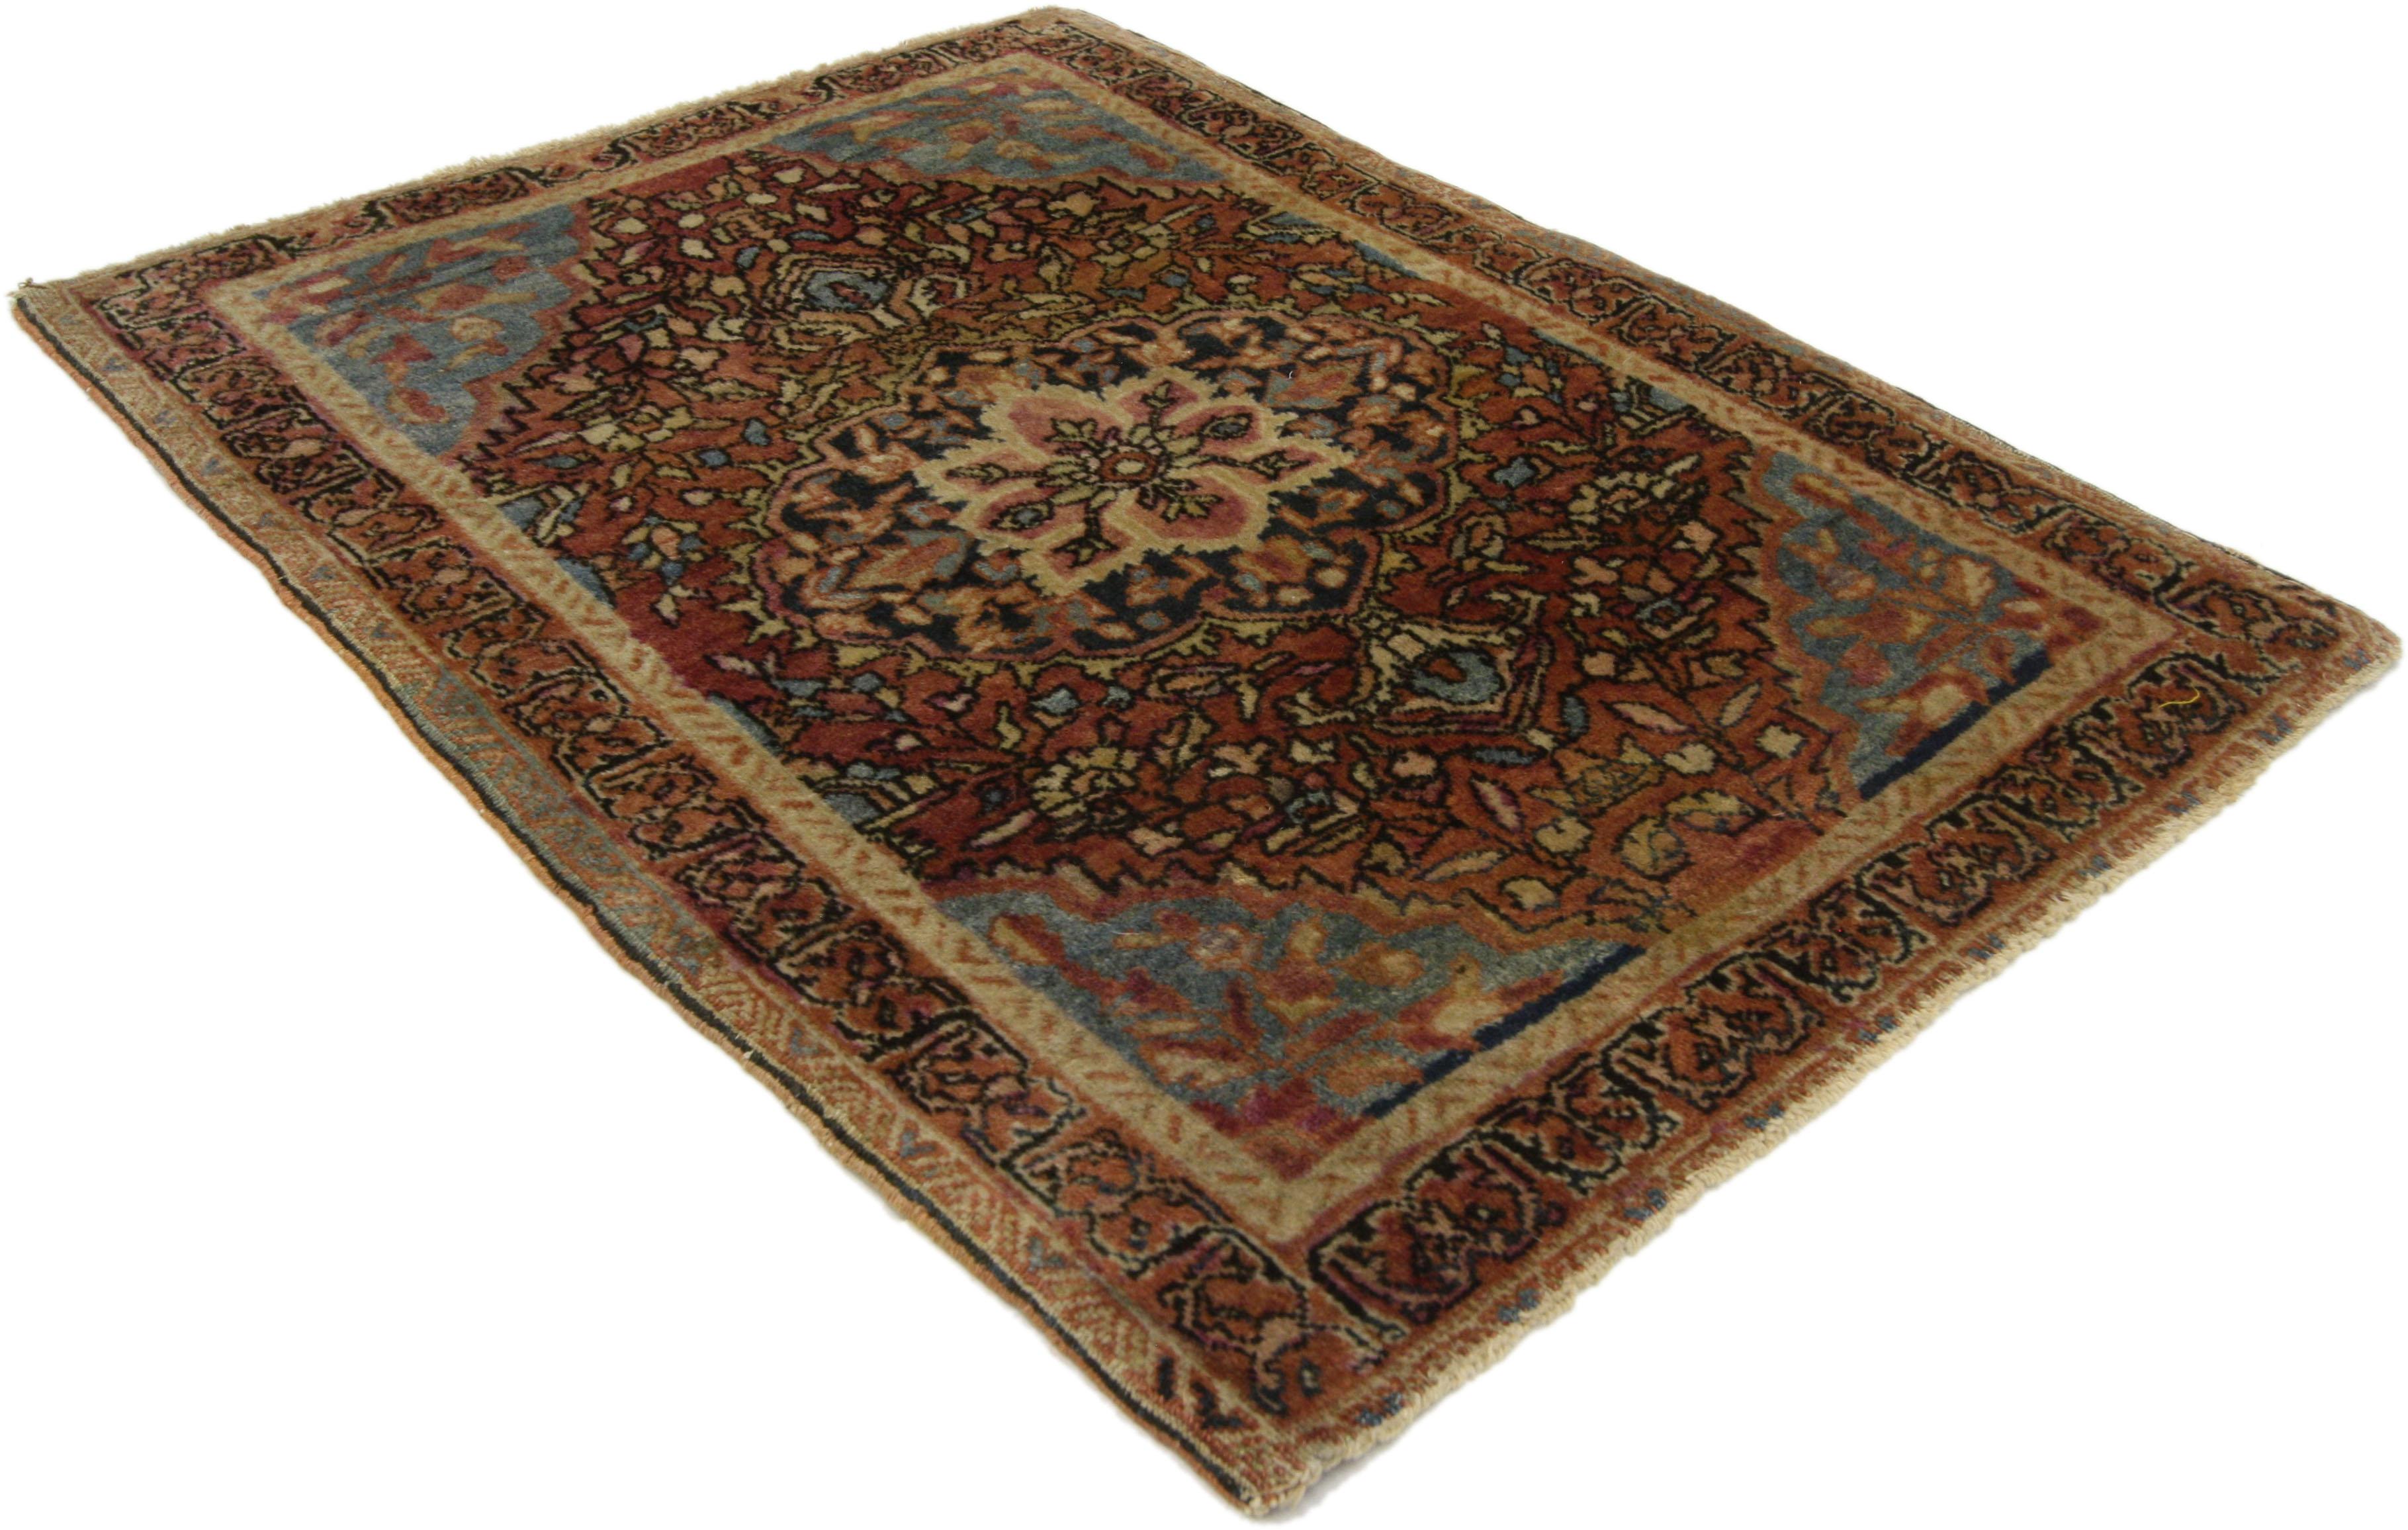 77163 Antique Persian Farahan Rug, 01'09 x 02'03. This hand-knotted wool antique Persian Farahan accent rug epitomizes the harmonious marriage of timeless design and understated elegance, offering a captivating addition to any space it graces. At